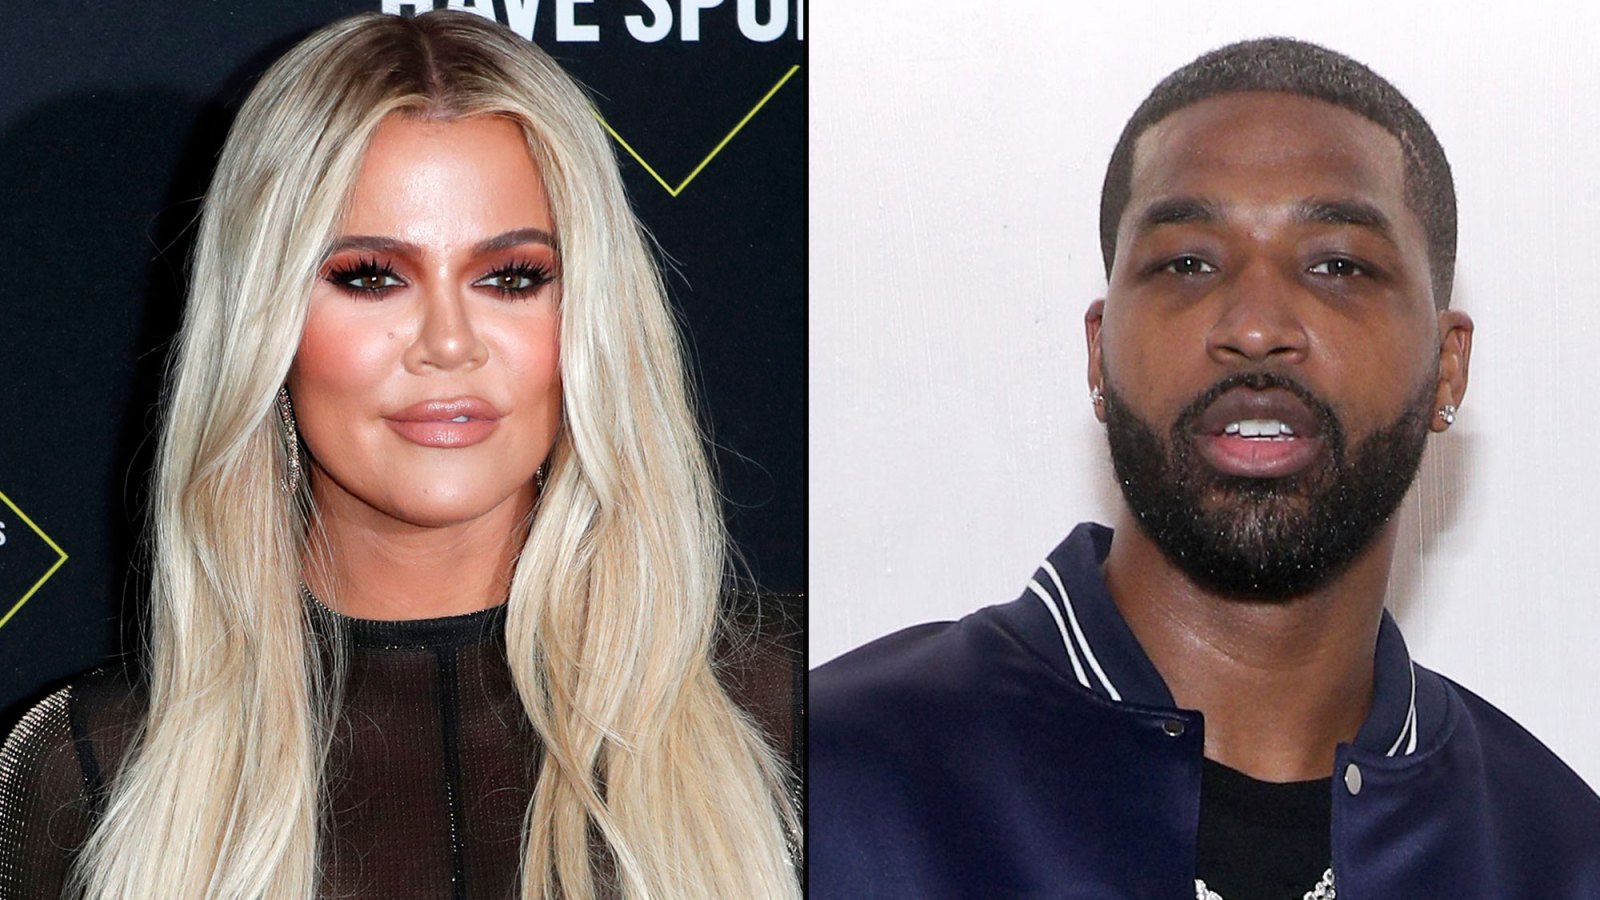 Khloe Kardashian Posts About Overcoming 'Mistakes' After Reuniting With Tristan Thompson at Christmas Party